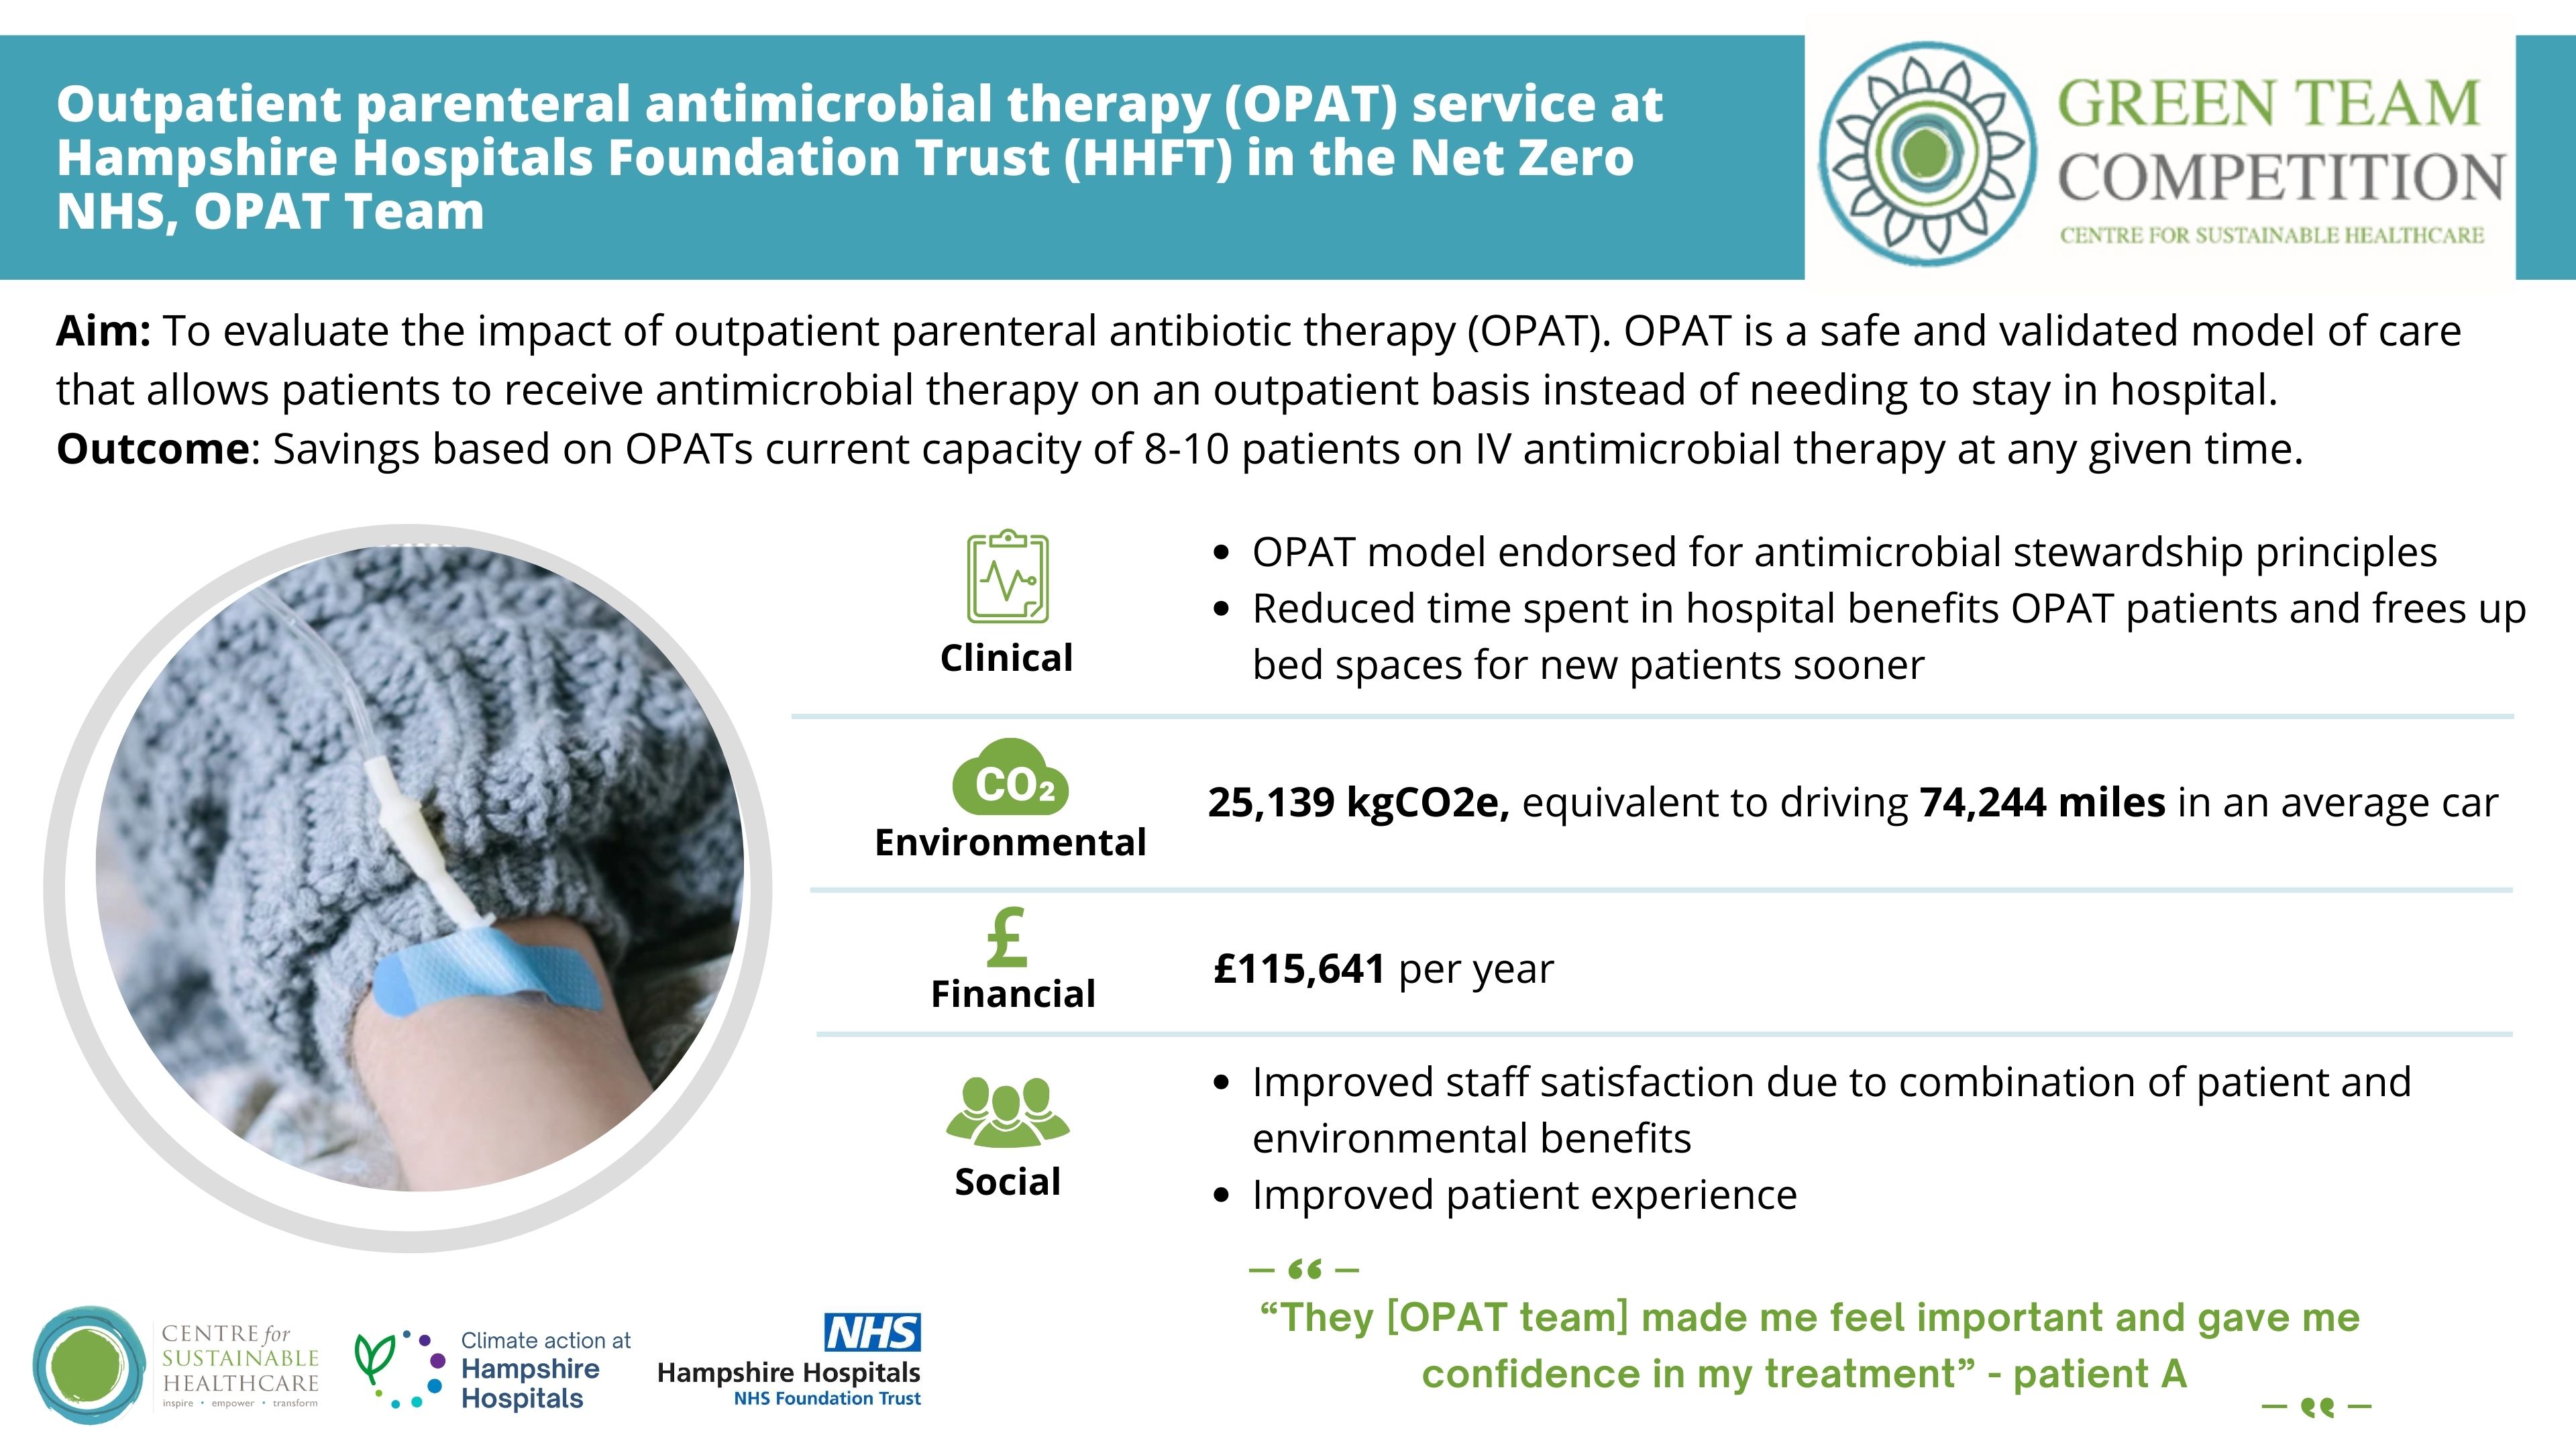 Outpatient parenteral antimicrobial therapy (OPAT) service at Hampshire Hospitals Foundation Trust (HHFT), OPAT Team Hampshire Green Team Competition 2023